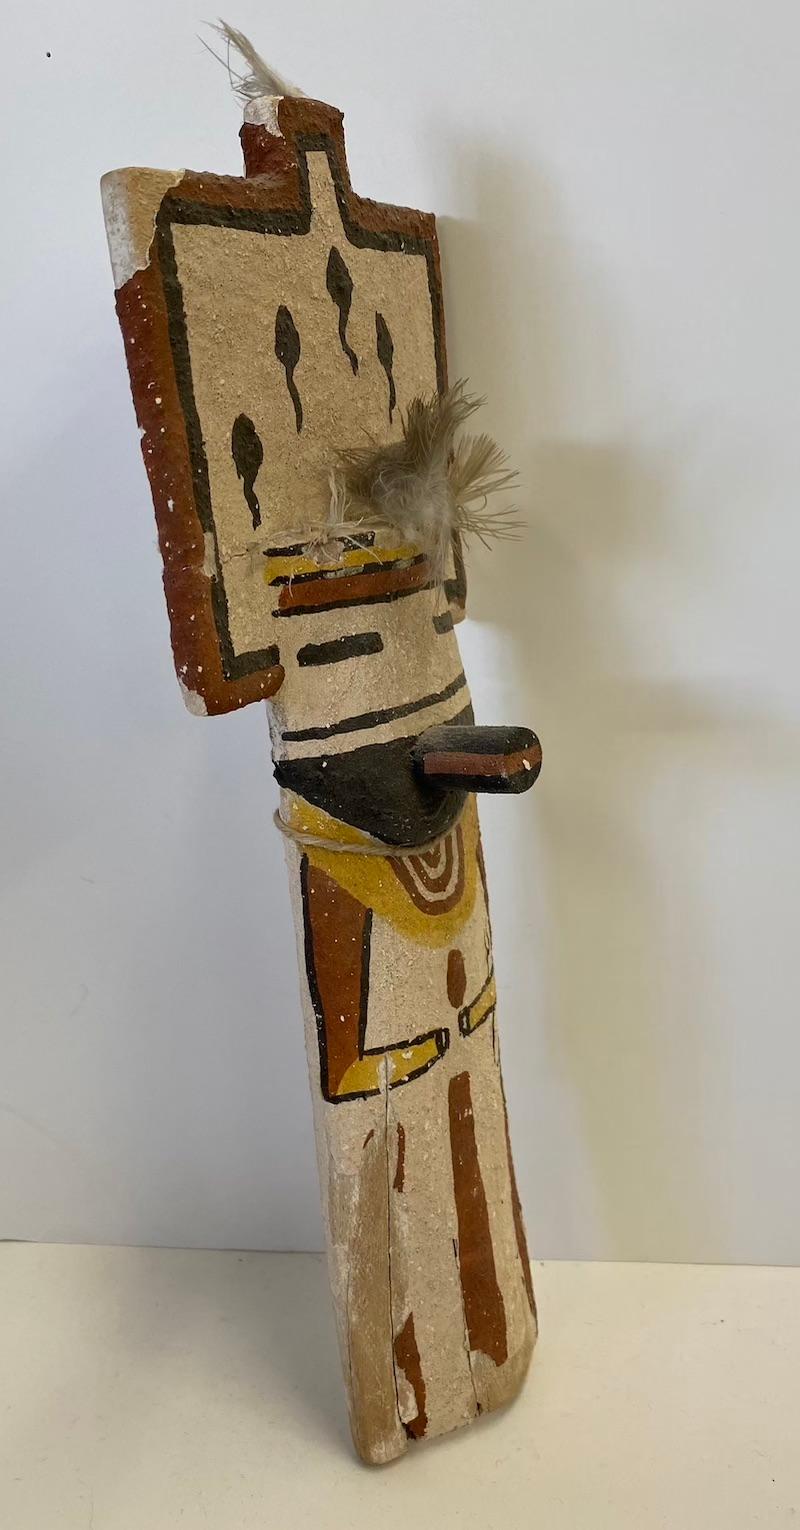 This is an excellent replica of a 19th century child's kachina Doll with a flat, wood tableta headdress and concave back. It is made of cotton wood and hand painted with a textured paint. With distressed feathers, old string, and a chipped paint